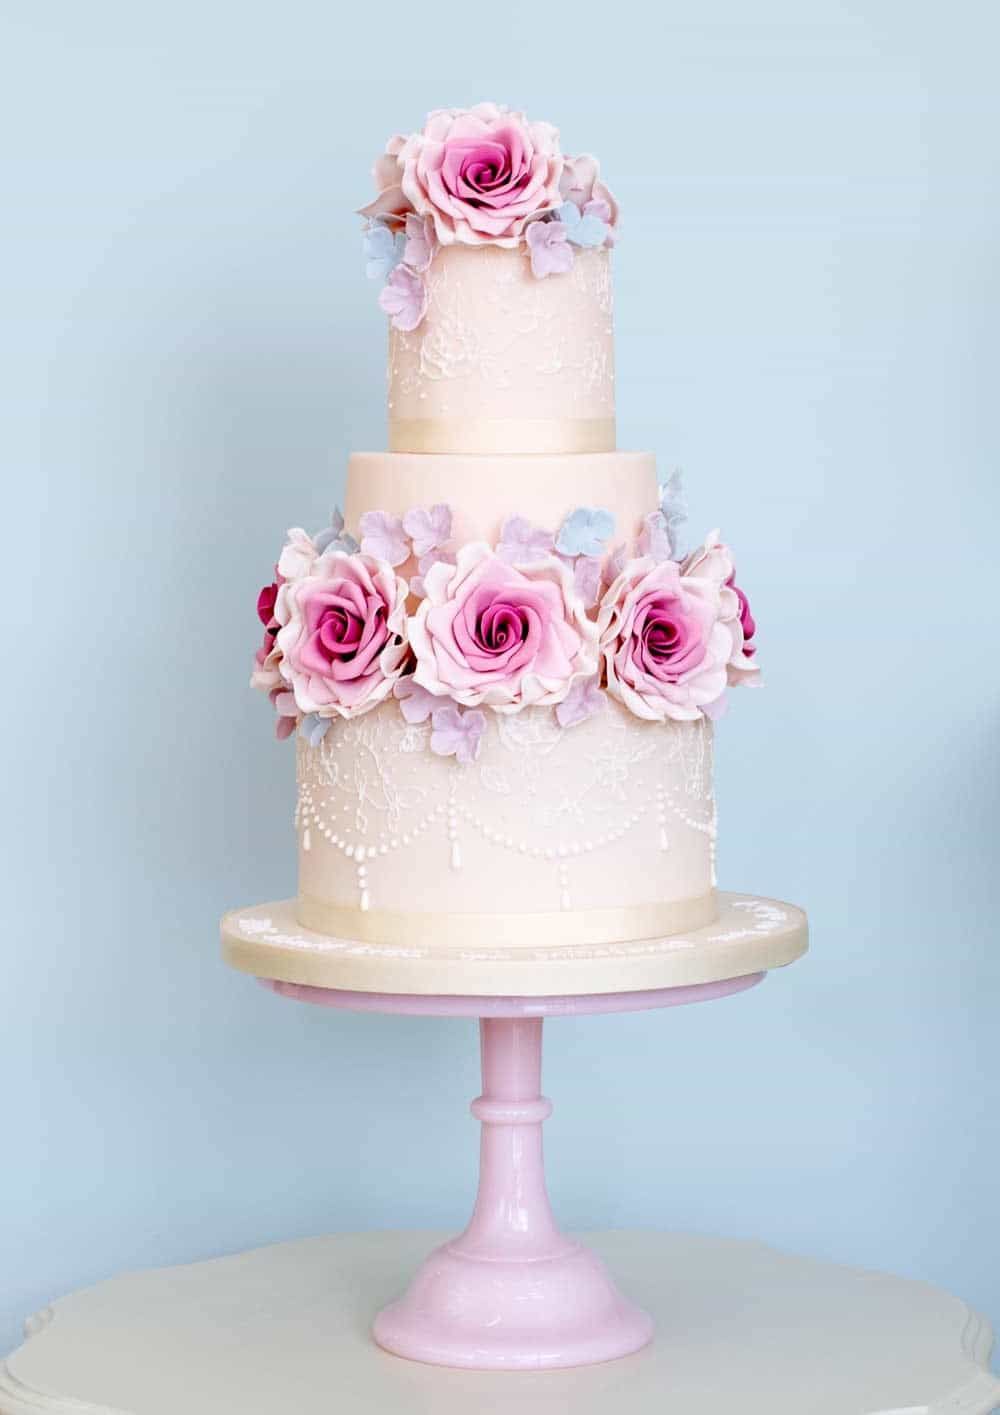 Floral Wedding Cake With Lace Icing (View 22 of 25)